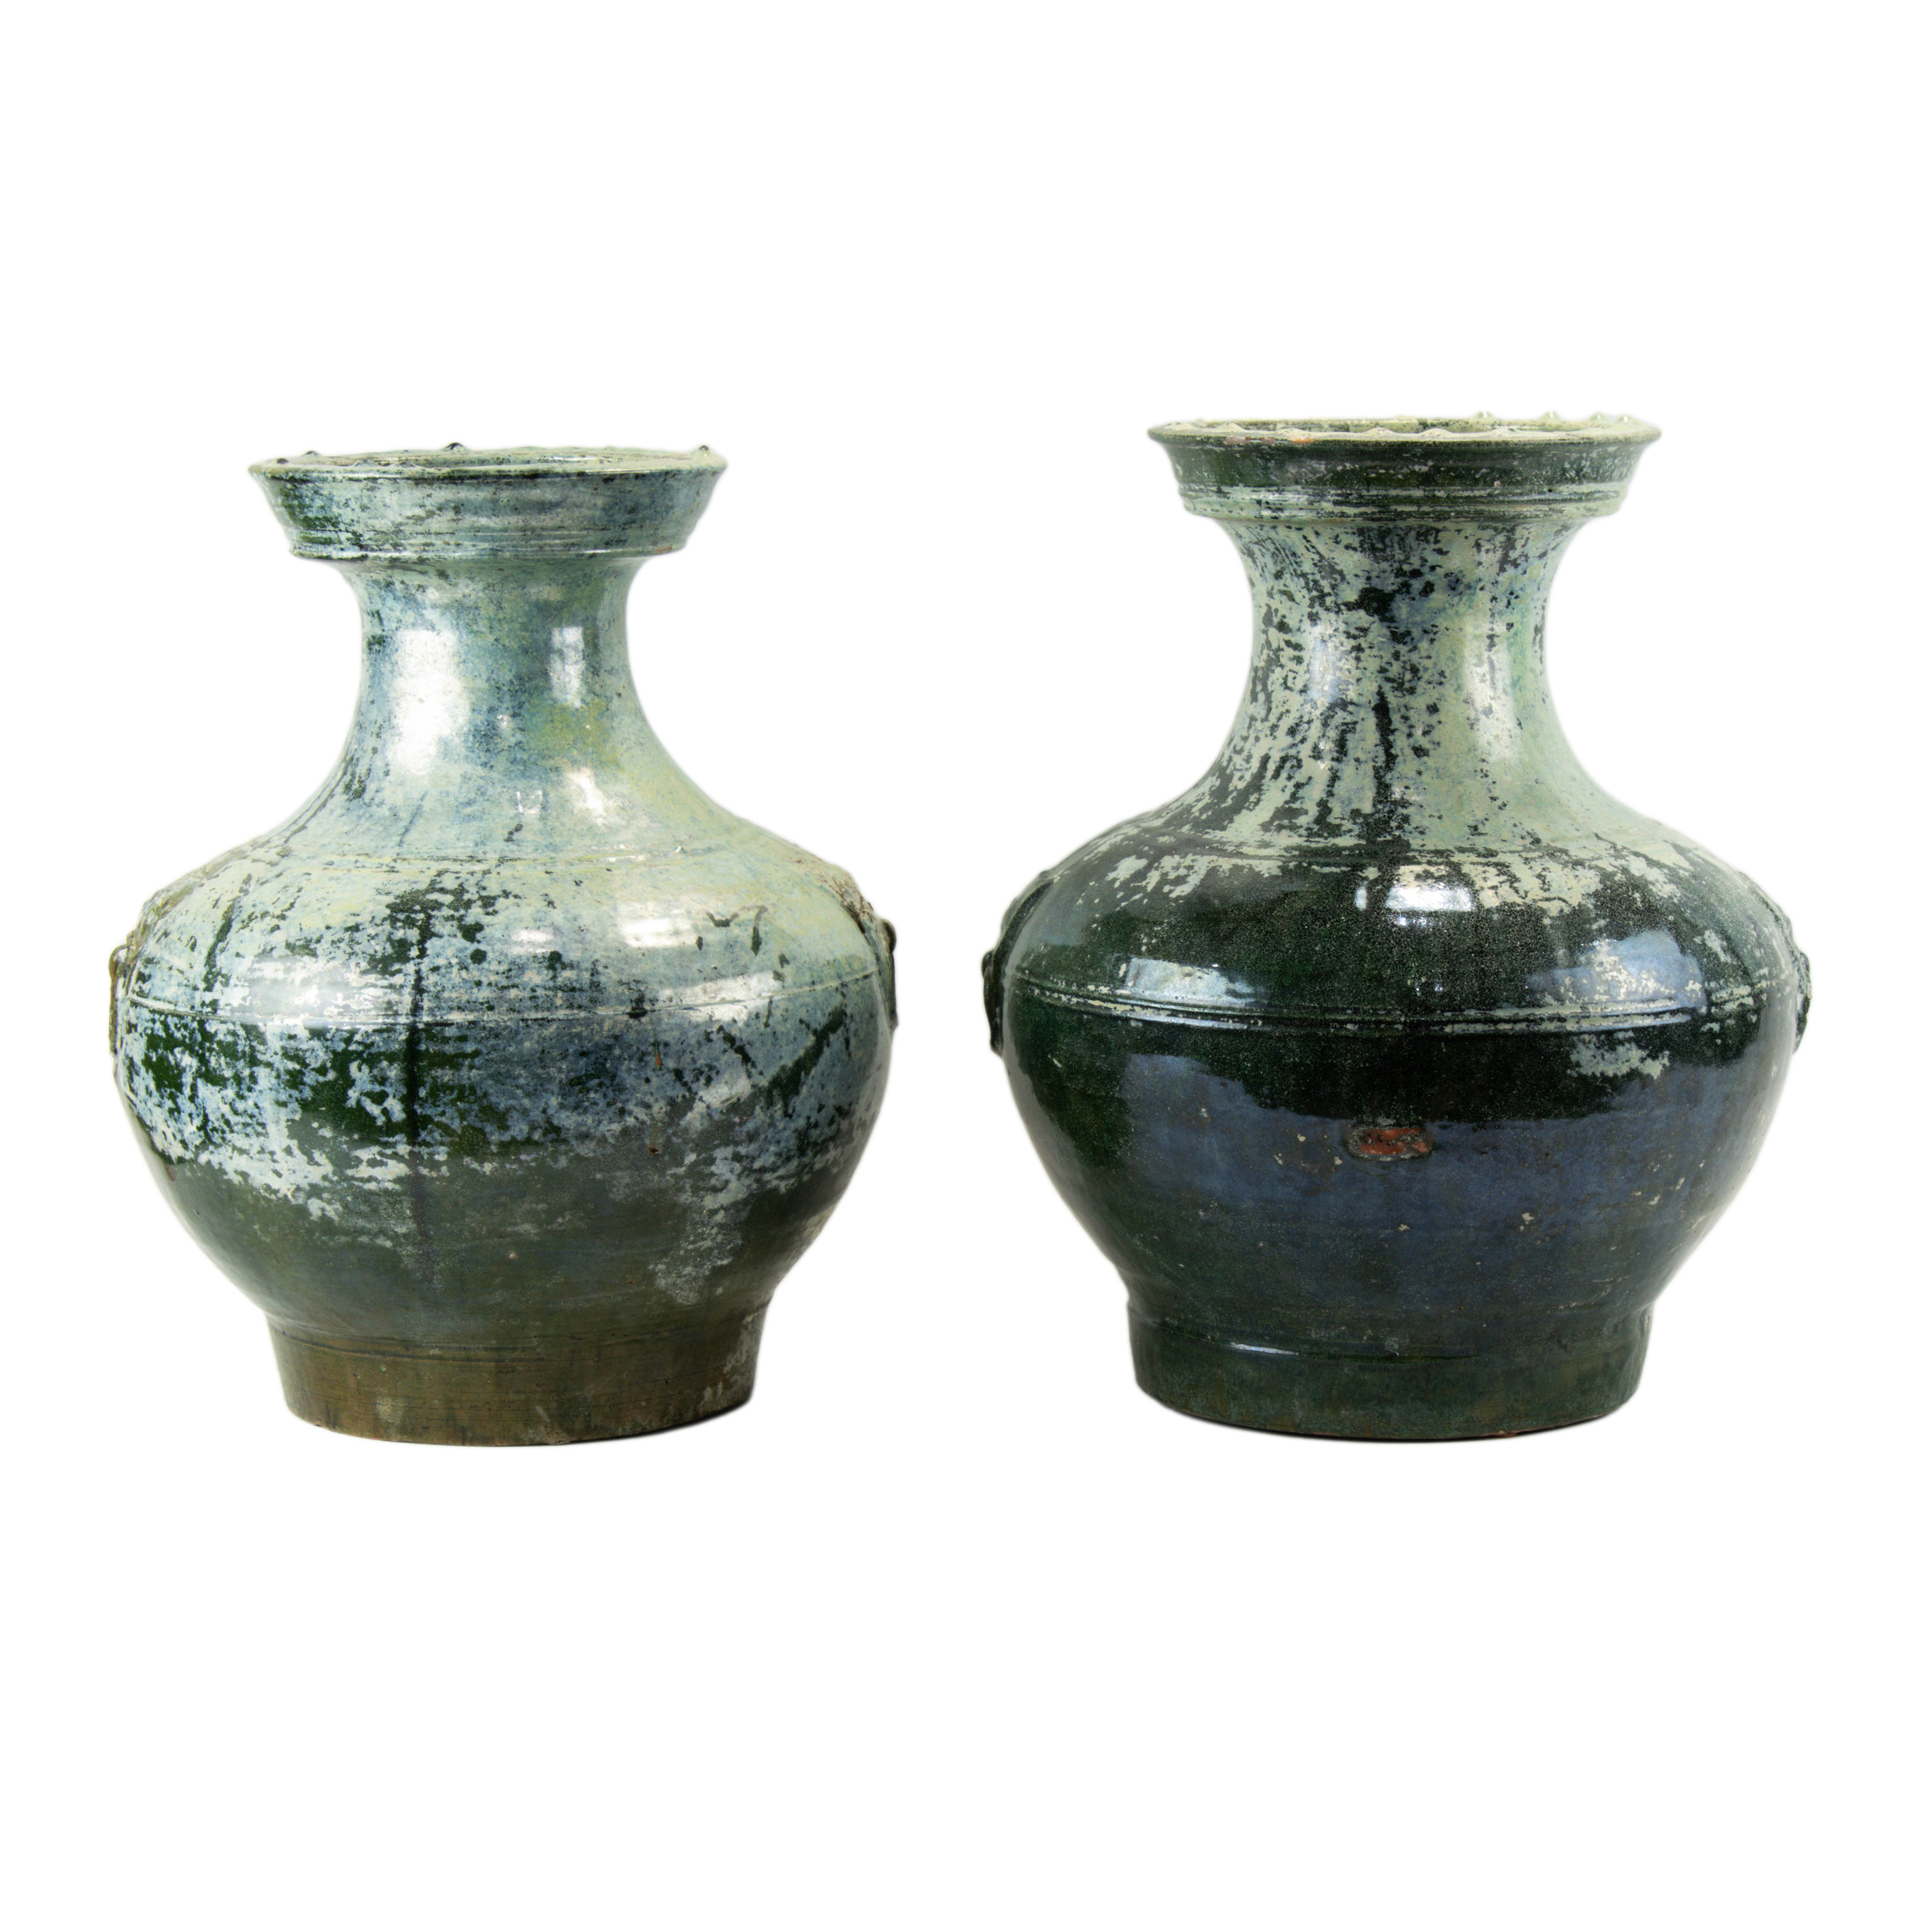 PAIR OF CHINESE HAN DYNASTY POTTERY